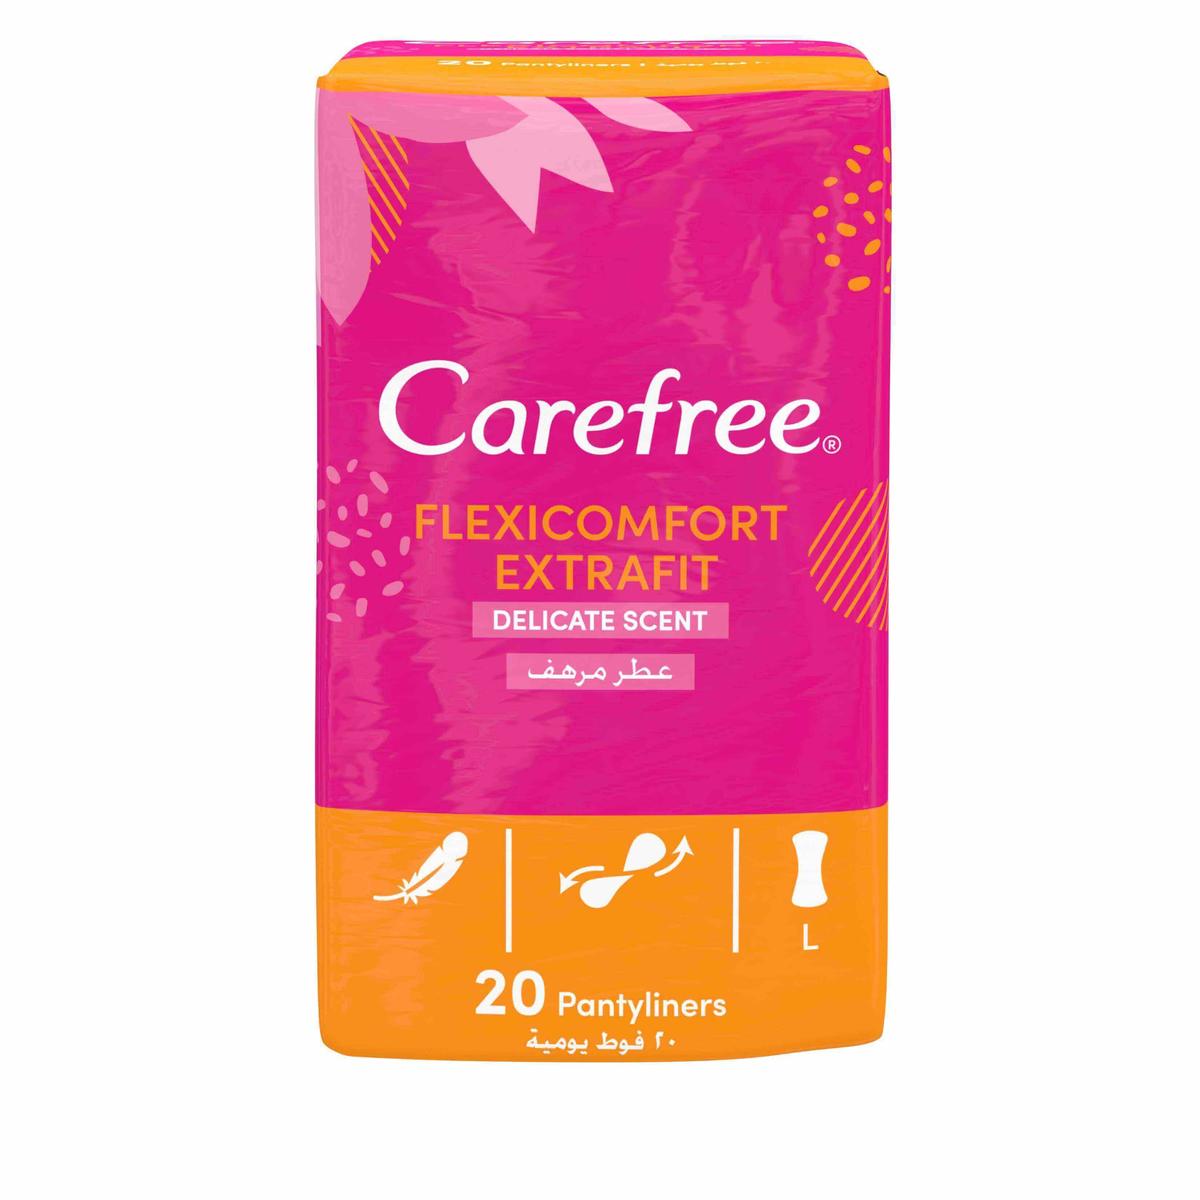 CAREFREE® FlexiComfort Extra Fit Panty Liner